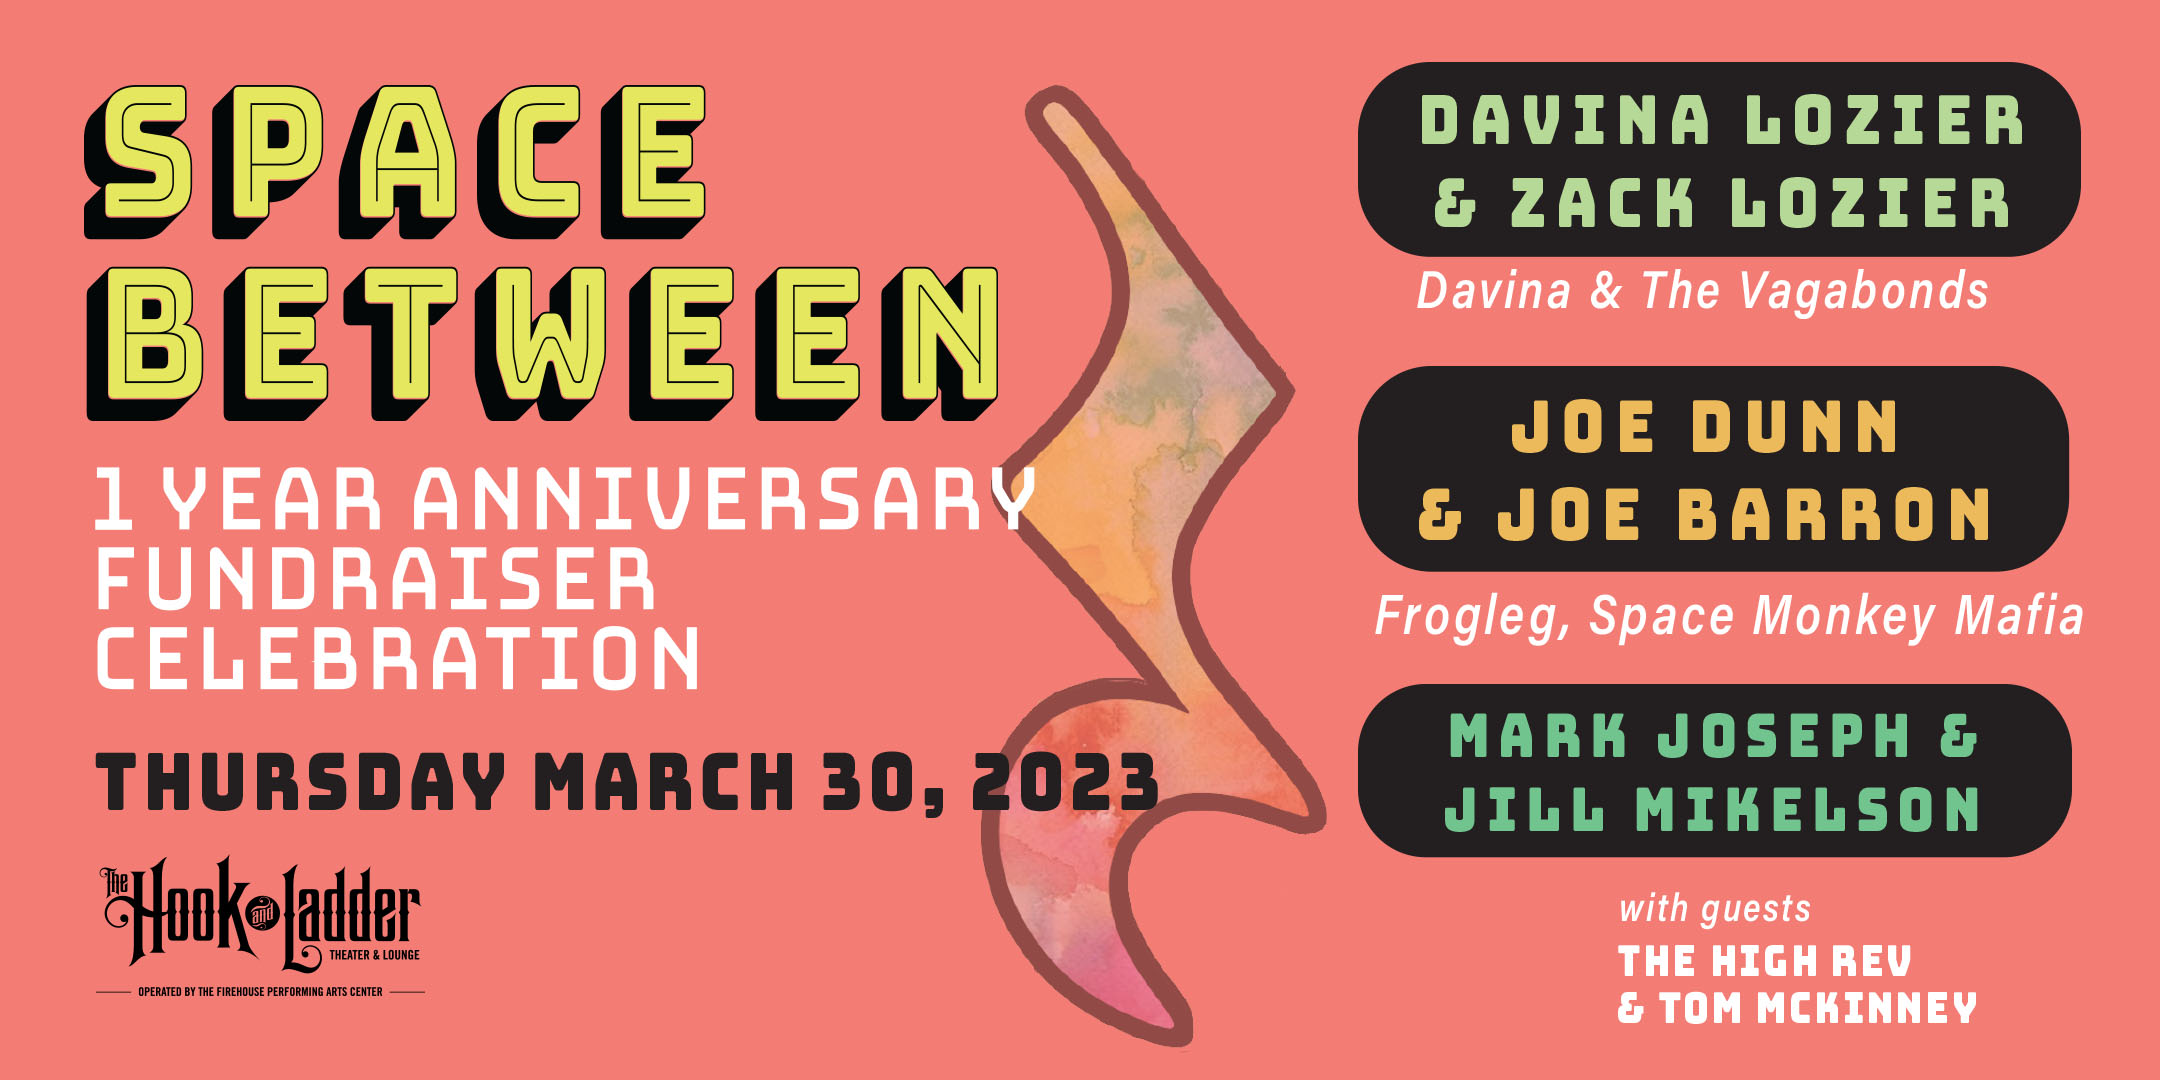 Space Between 1 Year Anniversary Fundraiser Celebration featuring Davina Lozier & Zack Lozier (Davina & The Vagabonds) Joe Dunn (Frogleg) & Joe Barron (Space Monkey Mafia) Mark Joseph & Jill Mikelson with guests The High Rev & Tom McKinney Thursday March 30 The Hook and Ladder Theater Doors 7pm :: Music 7:30pm :: 21+ $15 Advance / $20 Day of Show